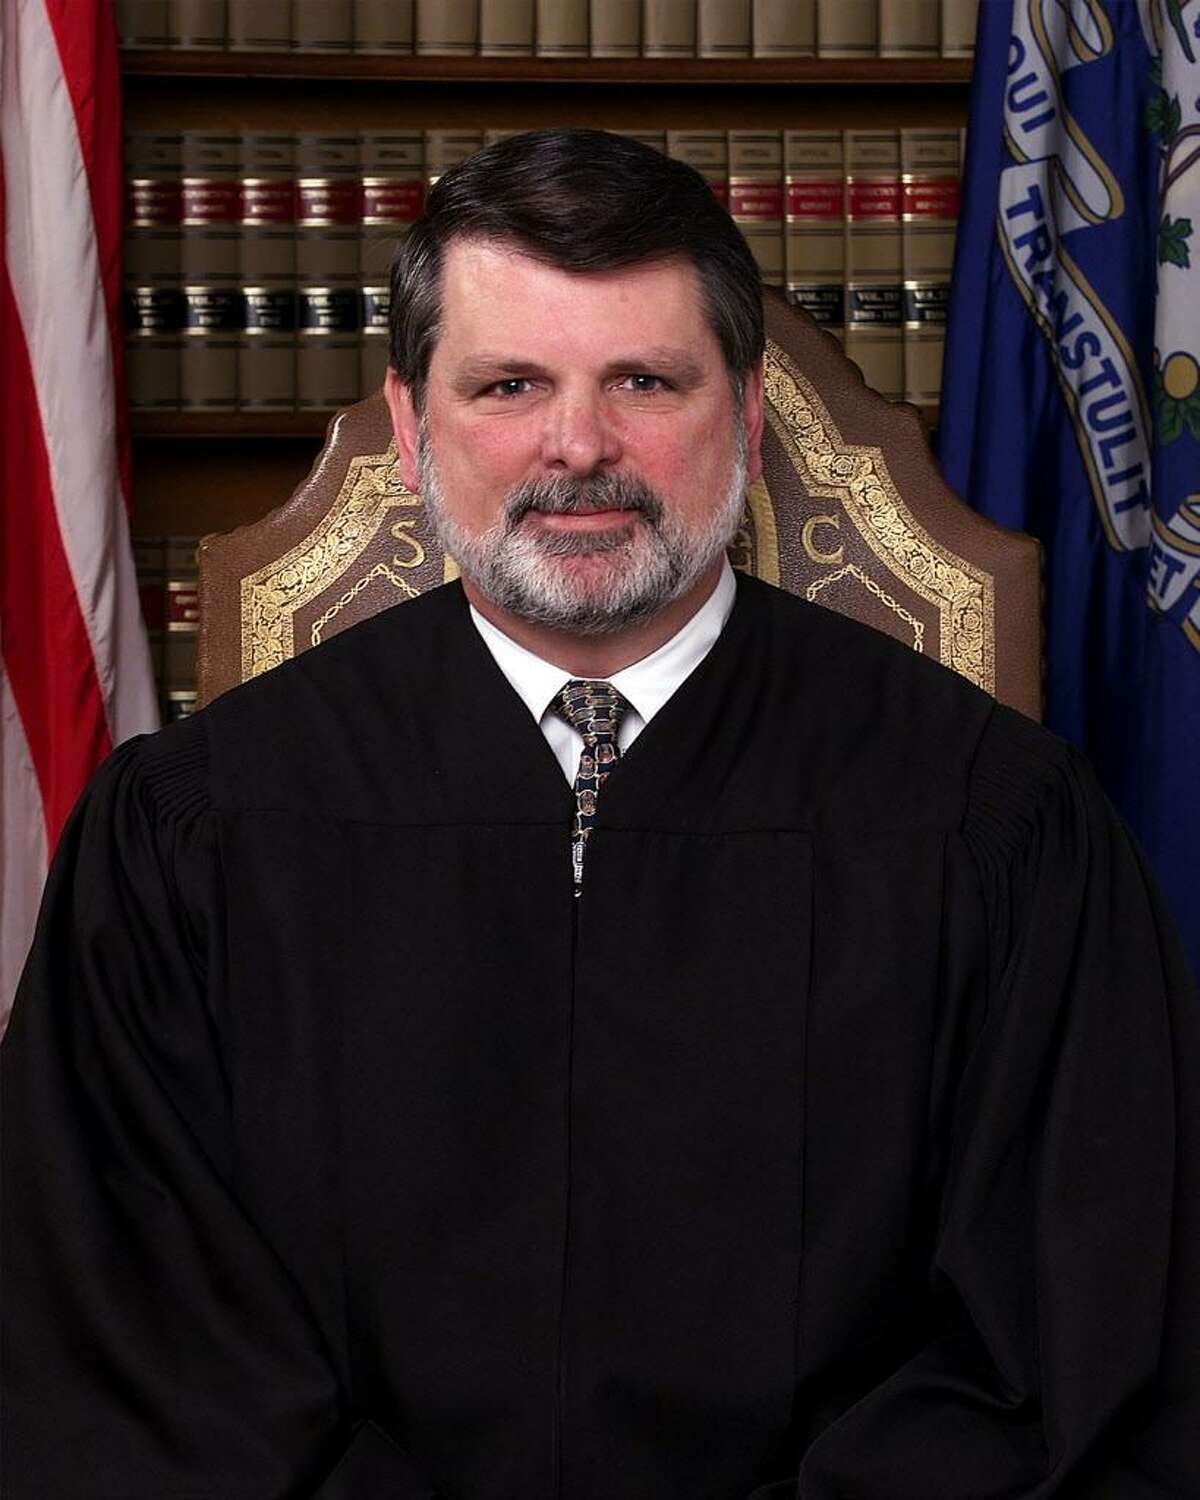 Justice Peter T. Zarella was nominated for chief justice of the state Supreme Court in 2006.